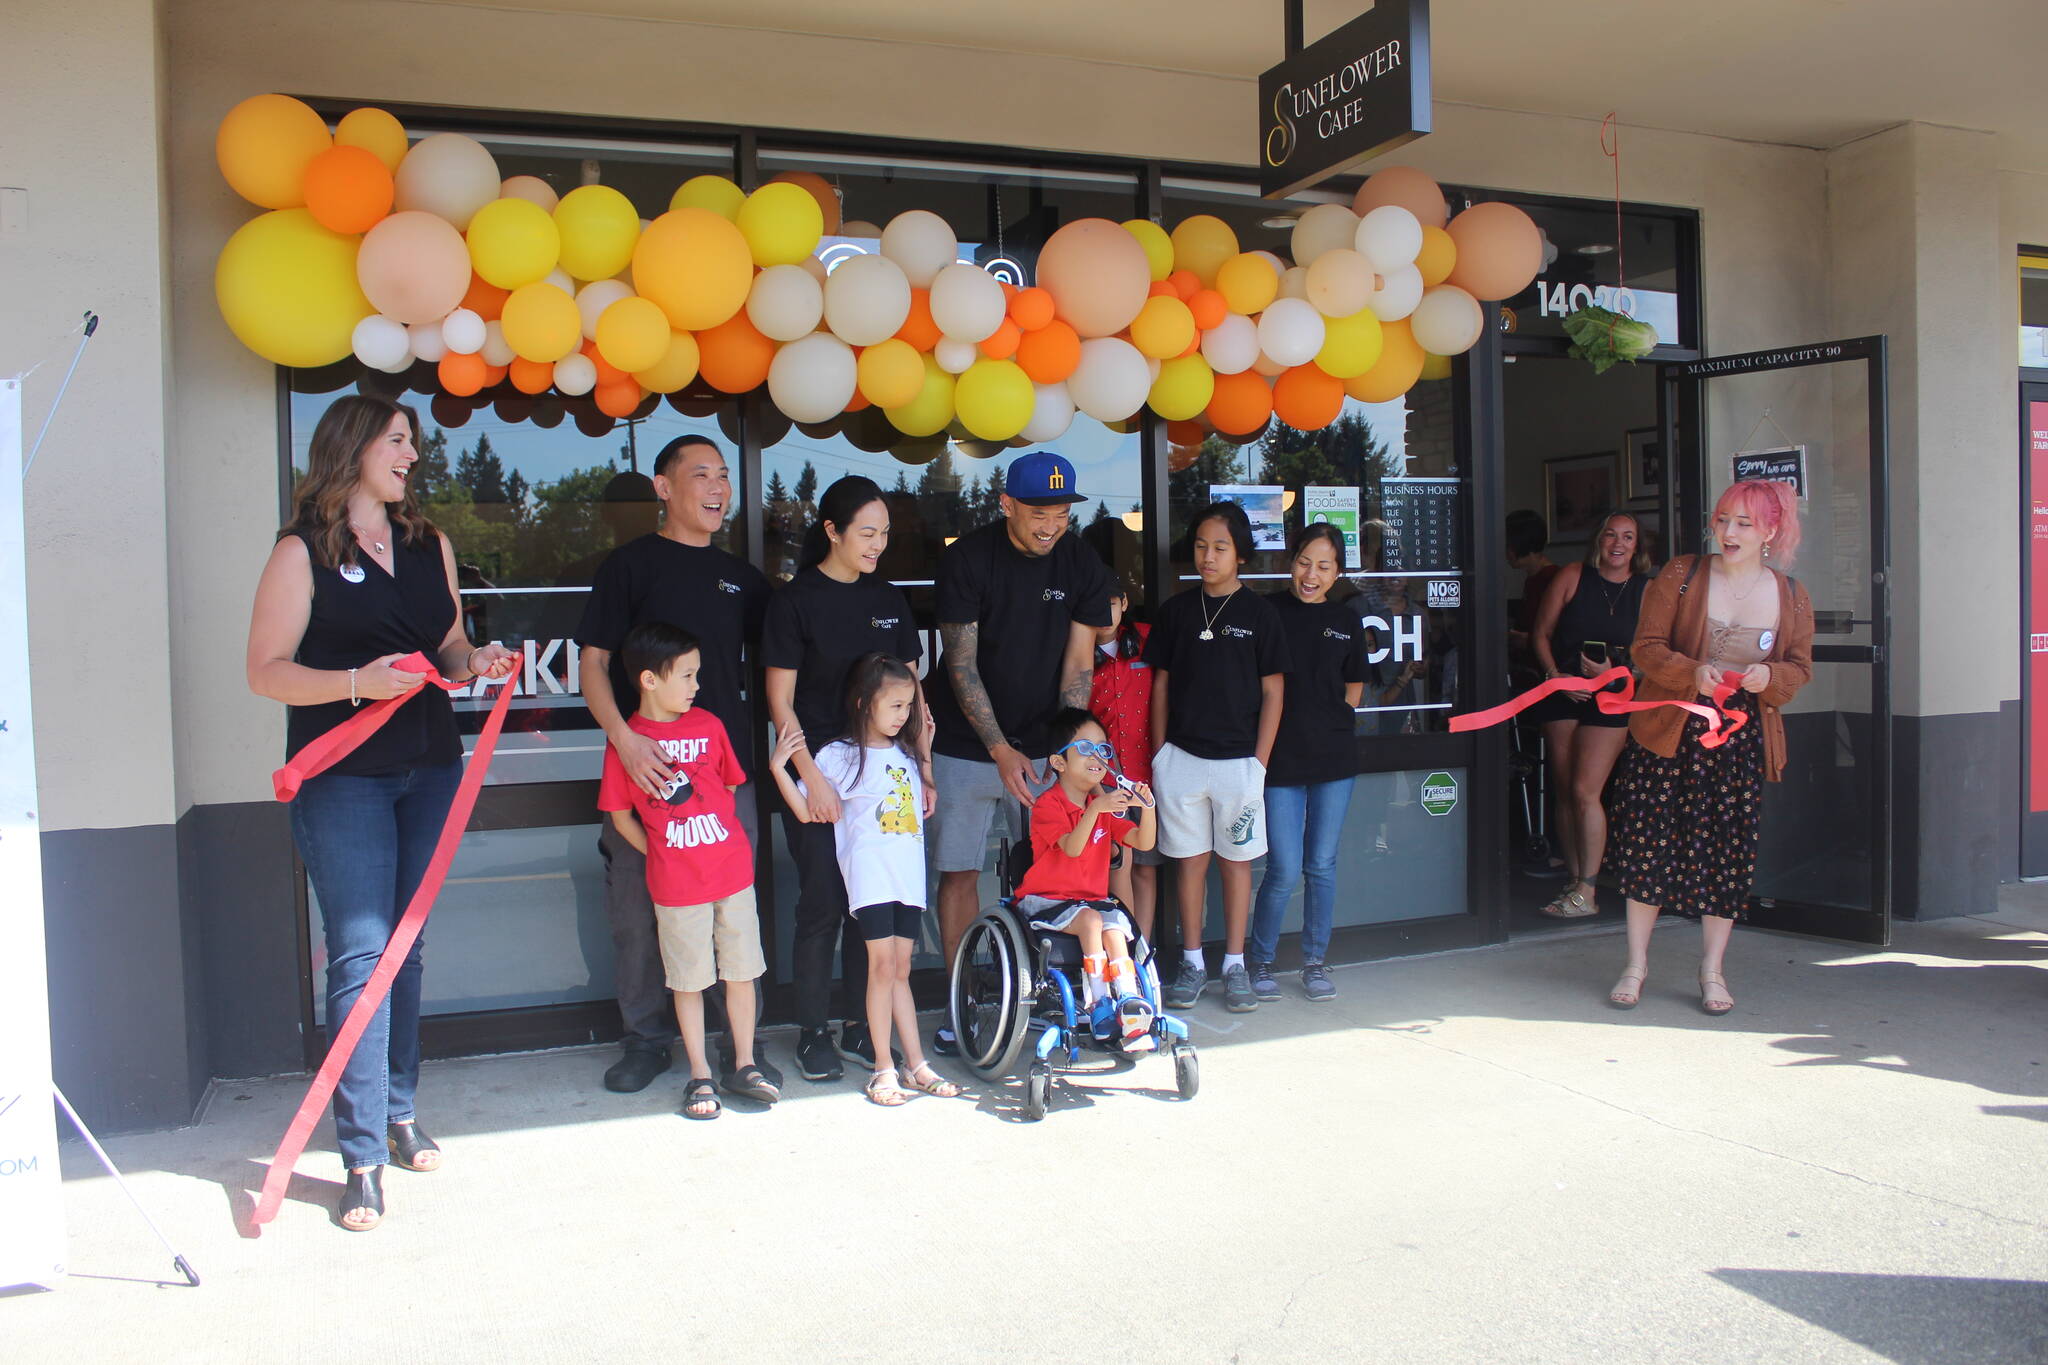 On Thursday, Aug. 17, the long-awaited Sunflower Café had its official ribbon-cutting in Fairwood, complete with lion dancers who performed outside and inside the restaurant as customers ate their food. A crowd gathered to celebrate the new family-owned restaurant at 14020 Southeast Petrovitsky Road. The café serves daily breakfast, from 8 a.m. to 3 p.m. (Photos by Bailey Jo Josie/Alb Media)